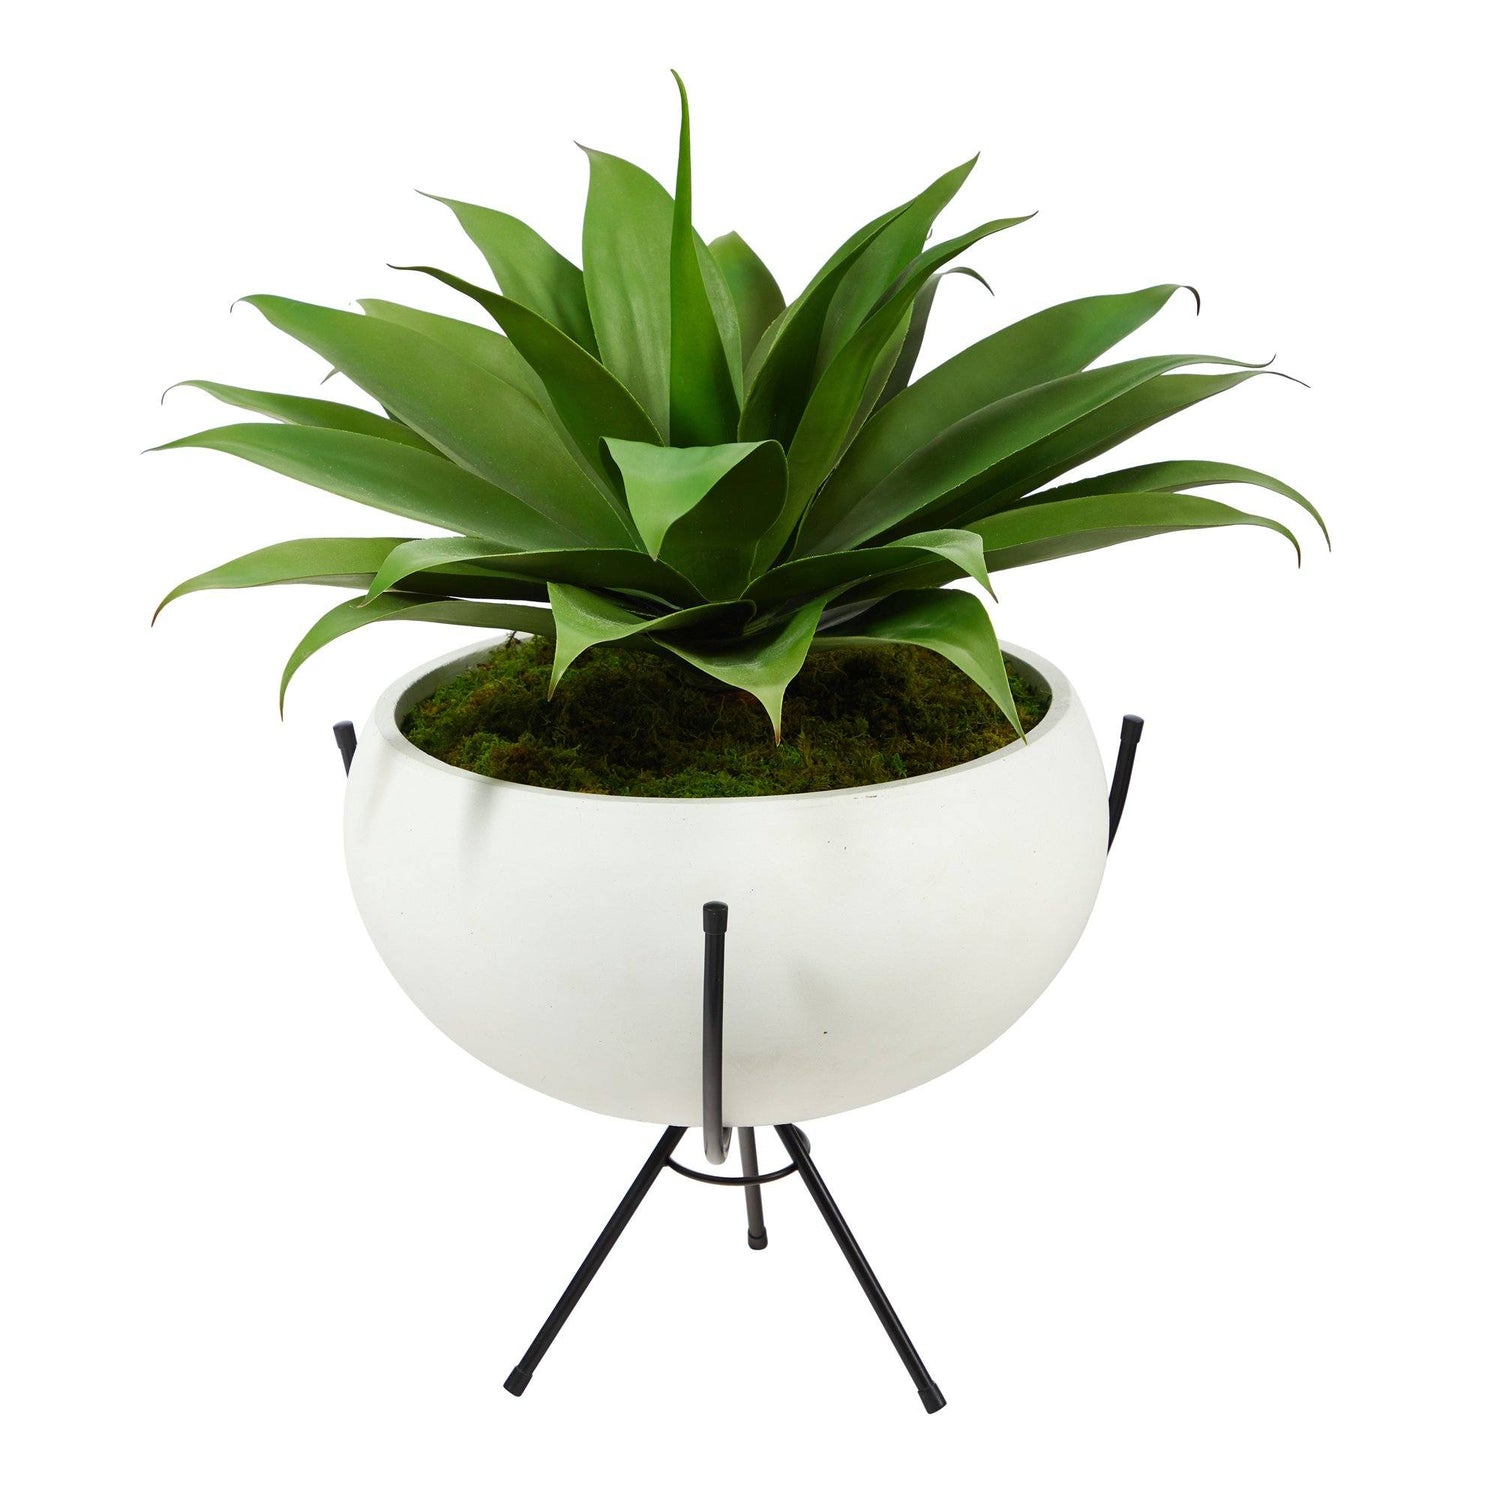 30” Agave Succulent Artificial Plant in White Planter with Metal Stand